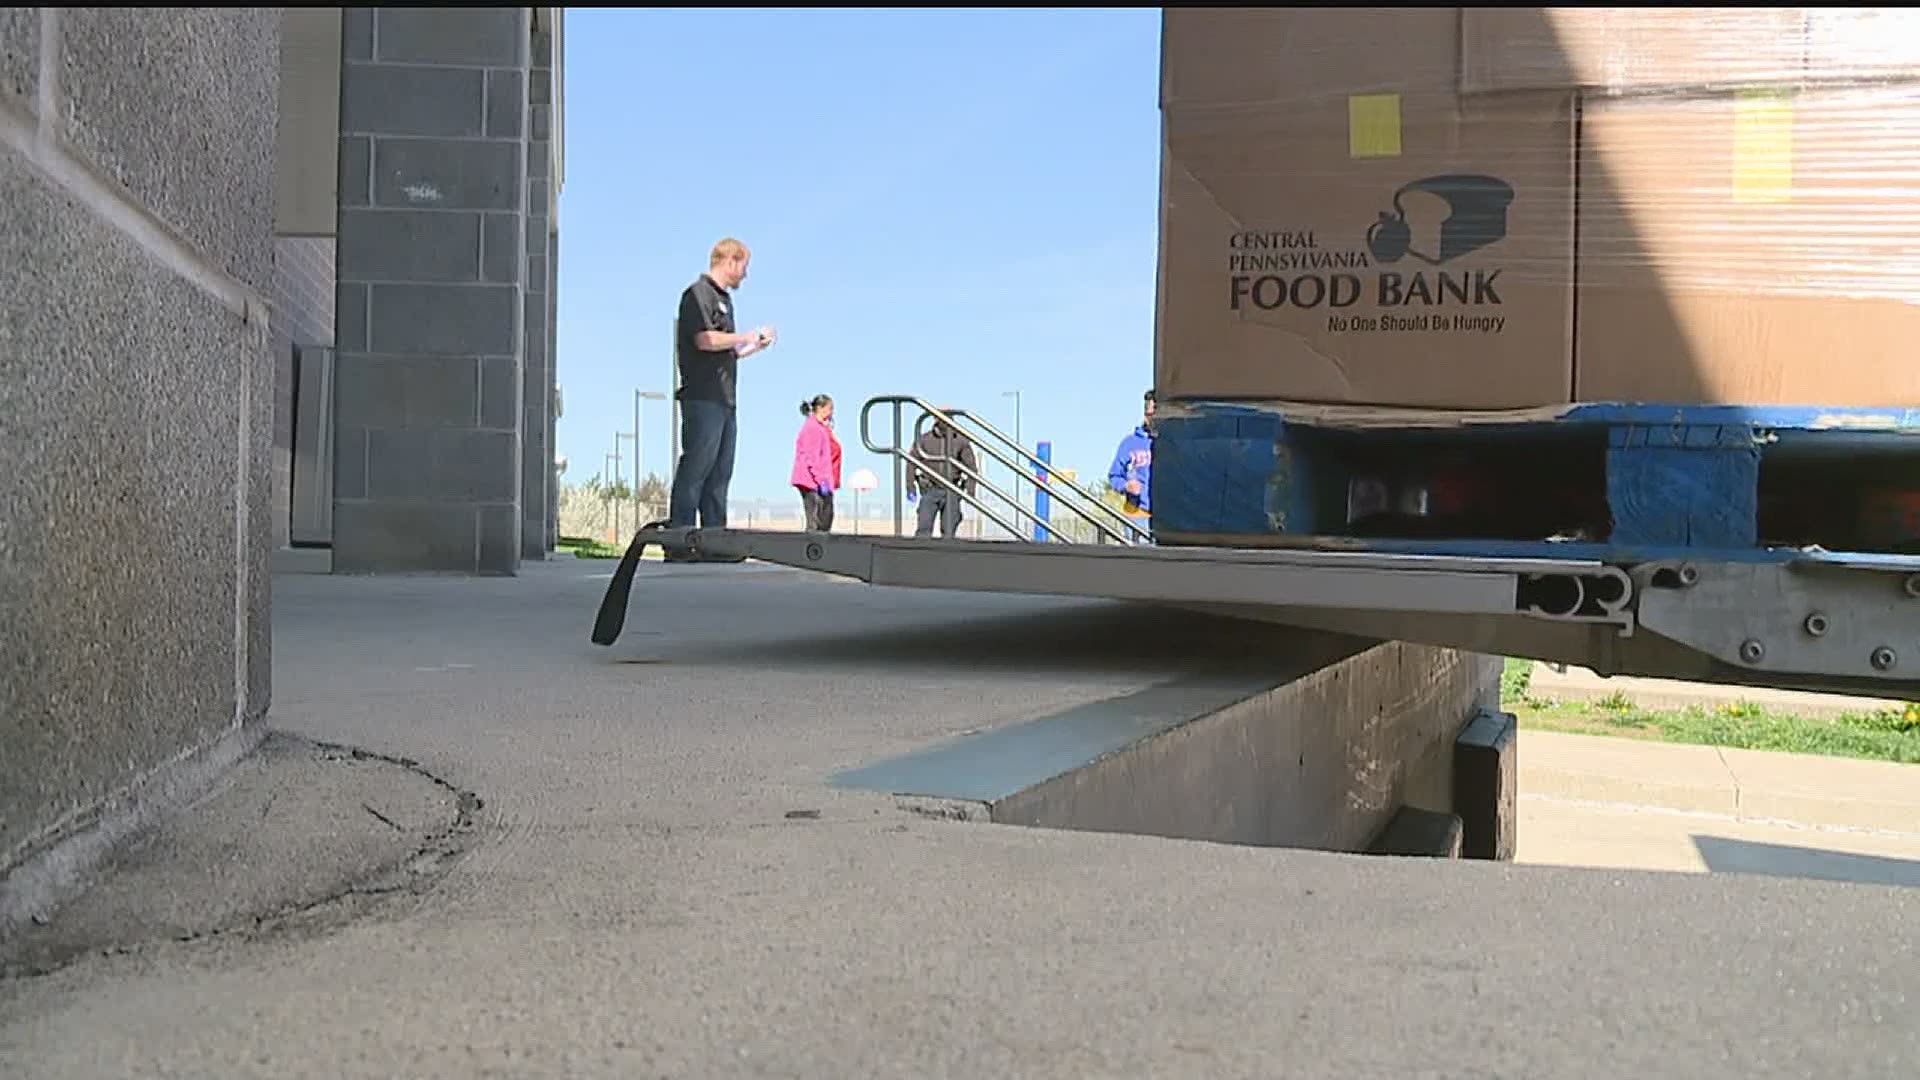 Demand for food assistance is rising at an astounding rate. Some local pantries are distributing double the amount of food.